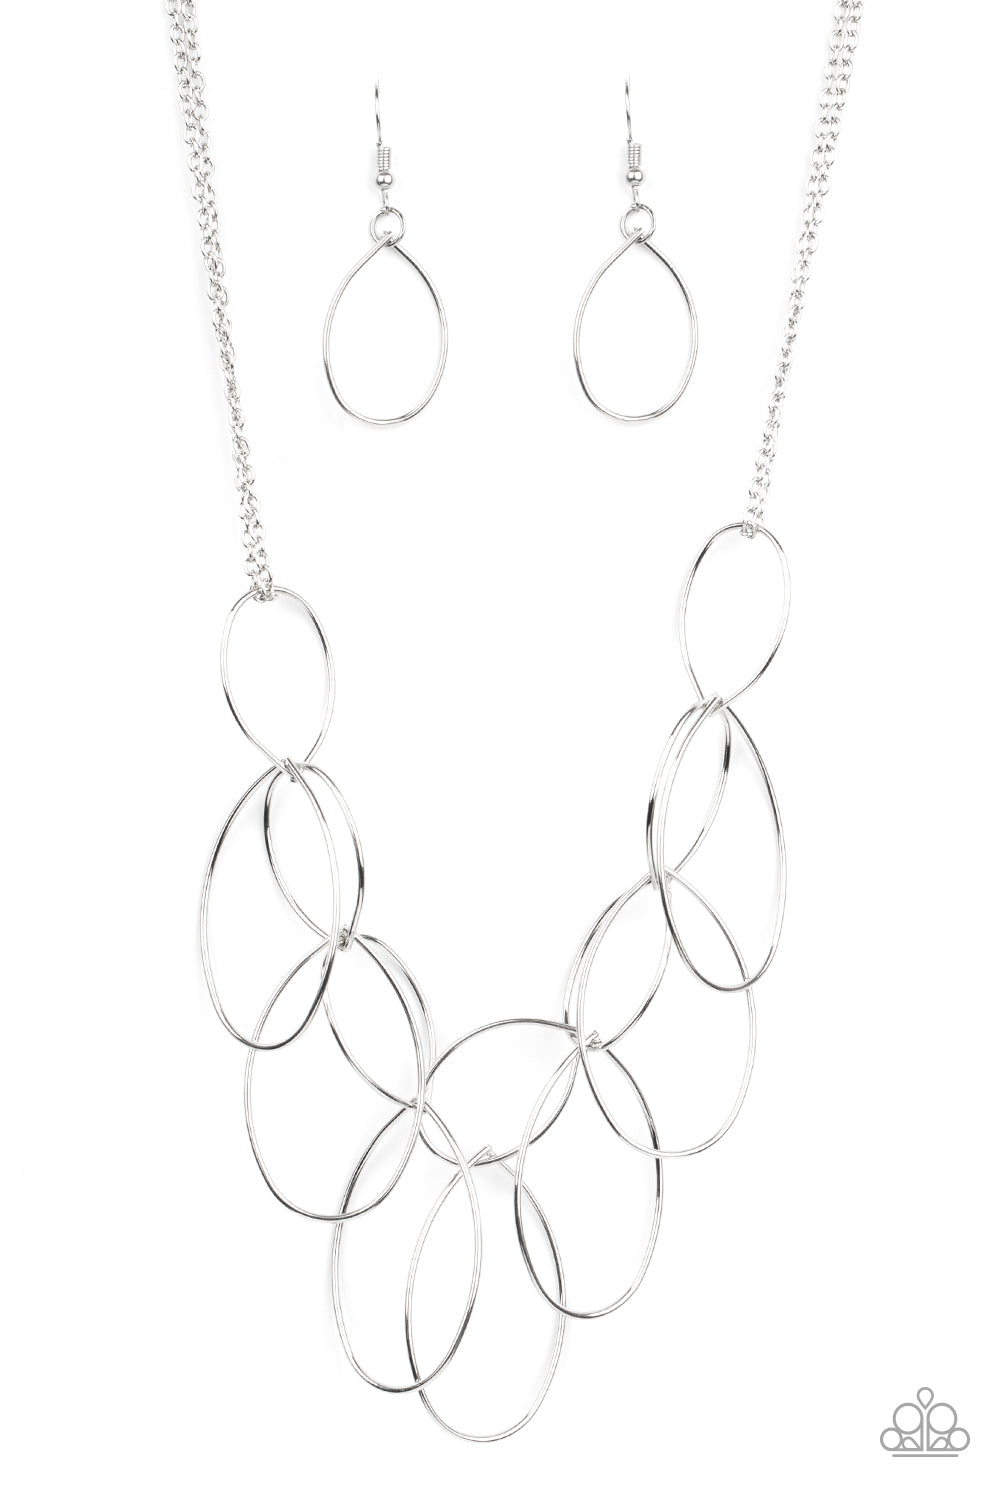 Paparazzi Top-TEAR Fashion - Silver Necklace - A Finishing Touch 